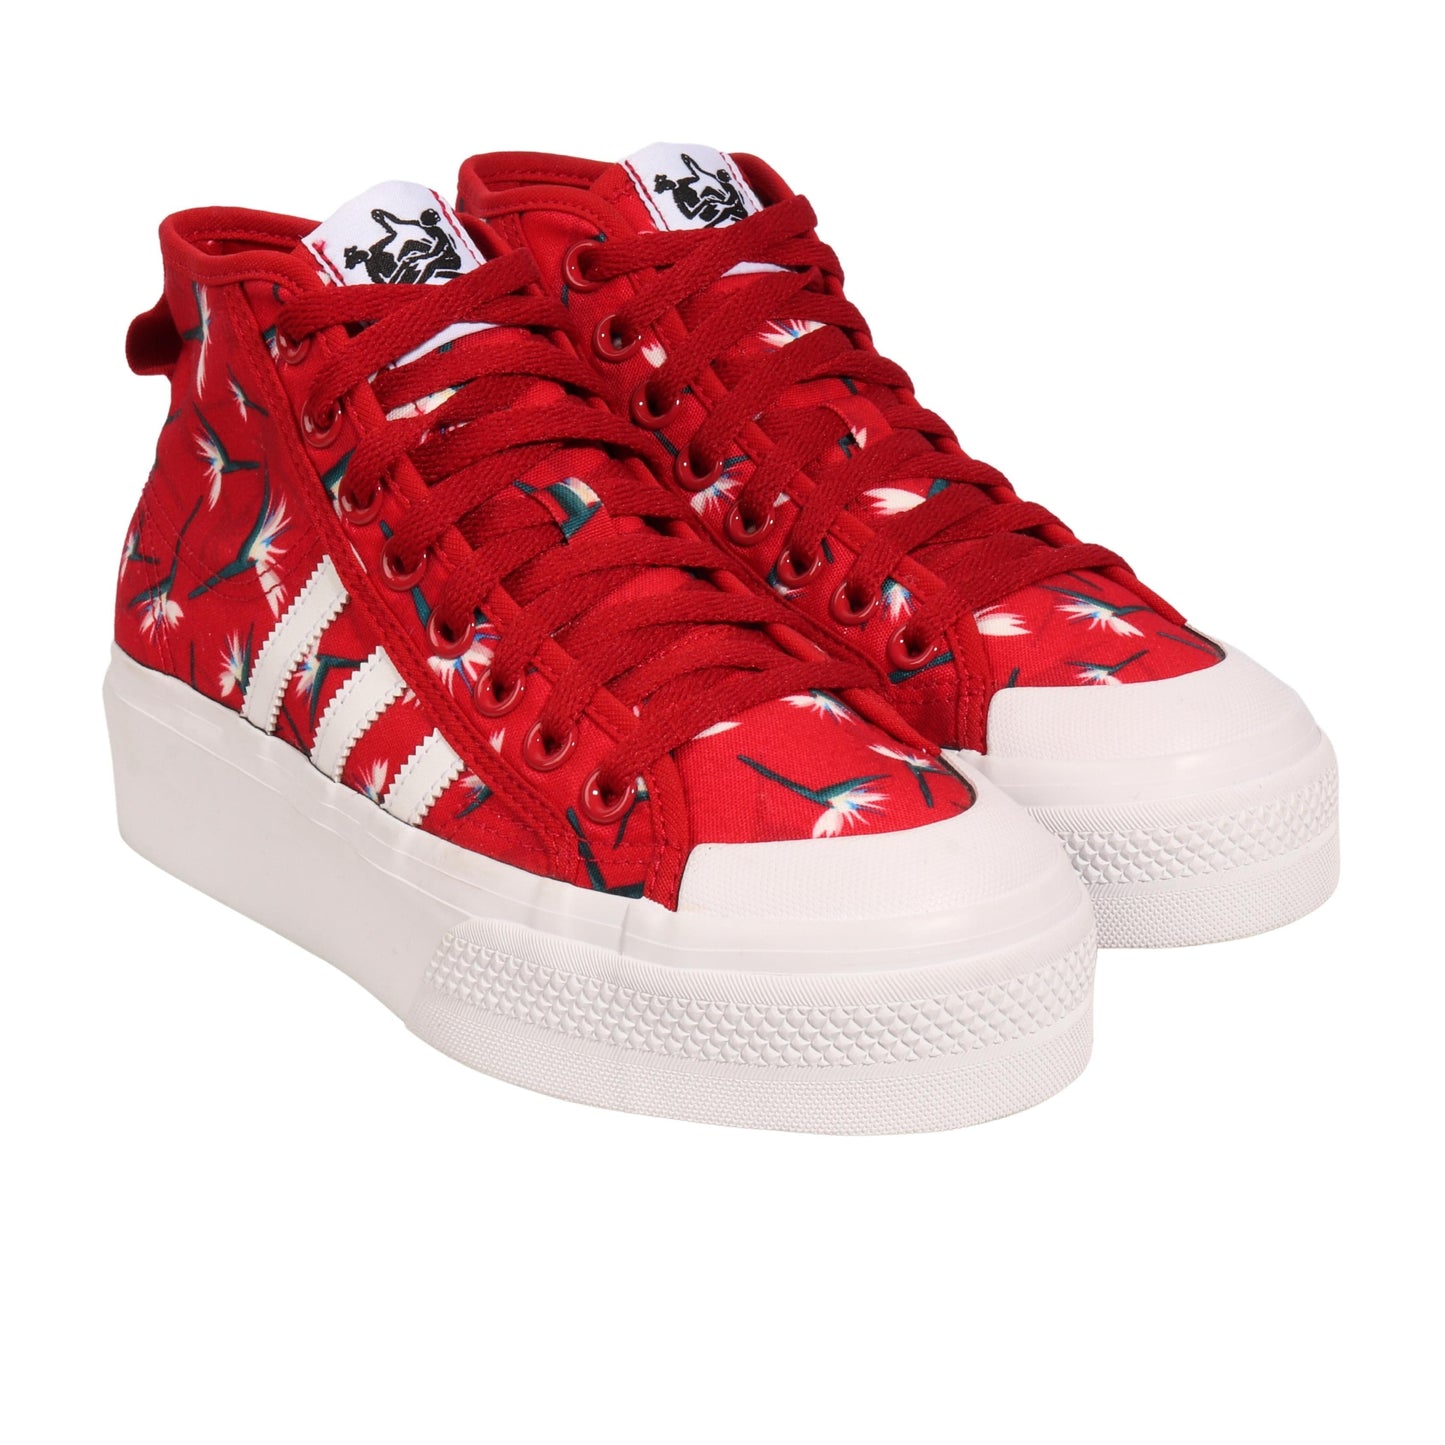 ADIDAS Athletic Shoes 38.5 / Red ADIDAS - Nizza Platform Mid Thebe Madudu Casual Shoes